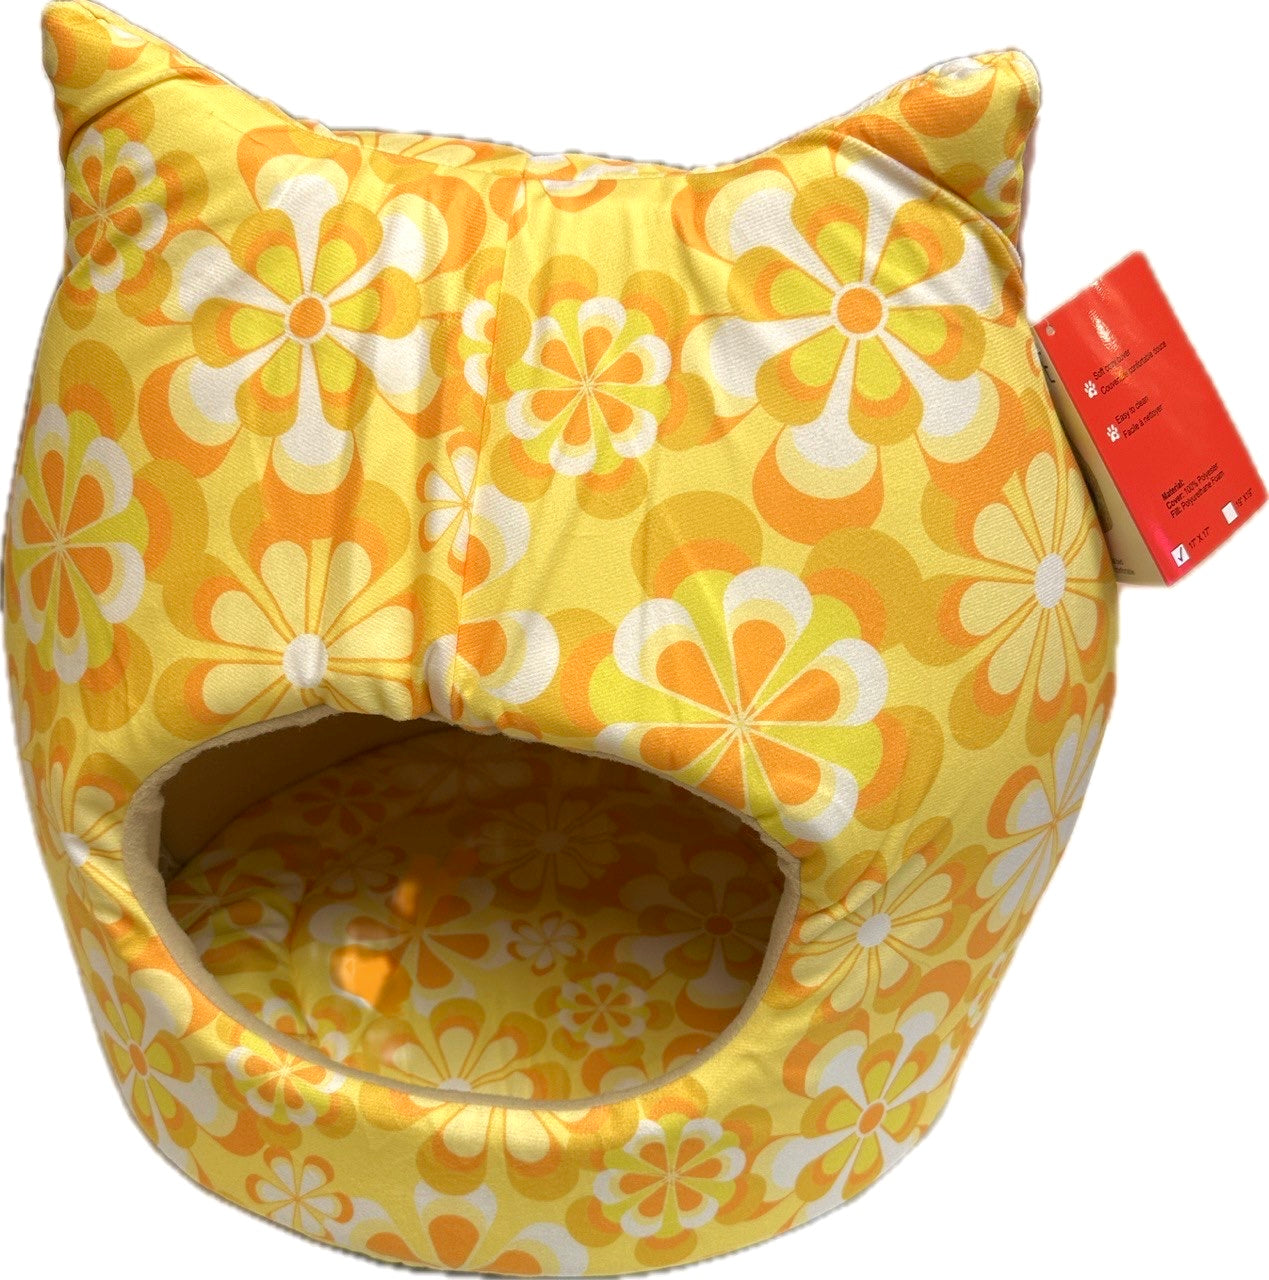 Ruff Love 70’s Floral Cozy Cat Beds